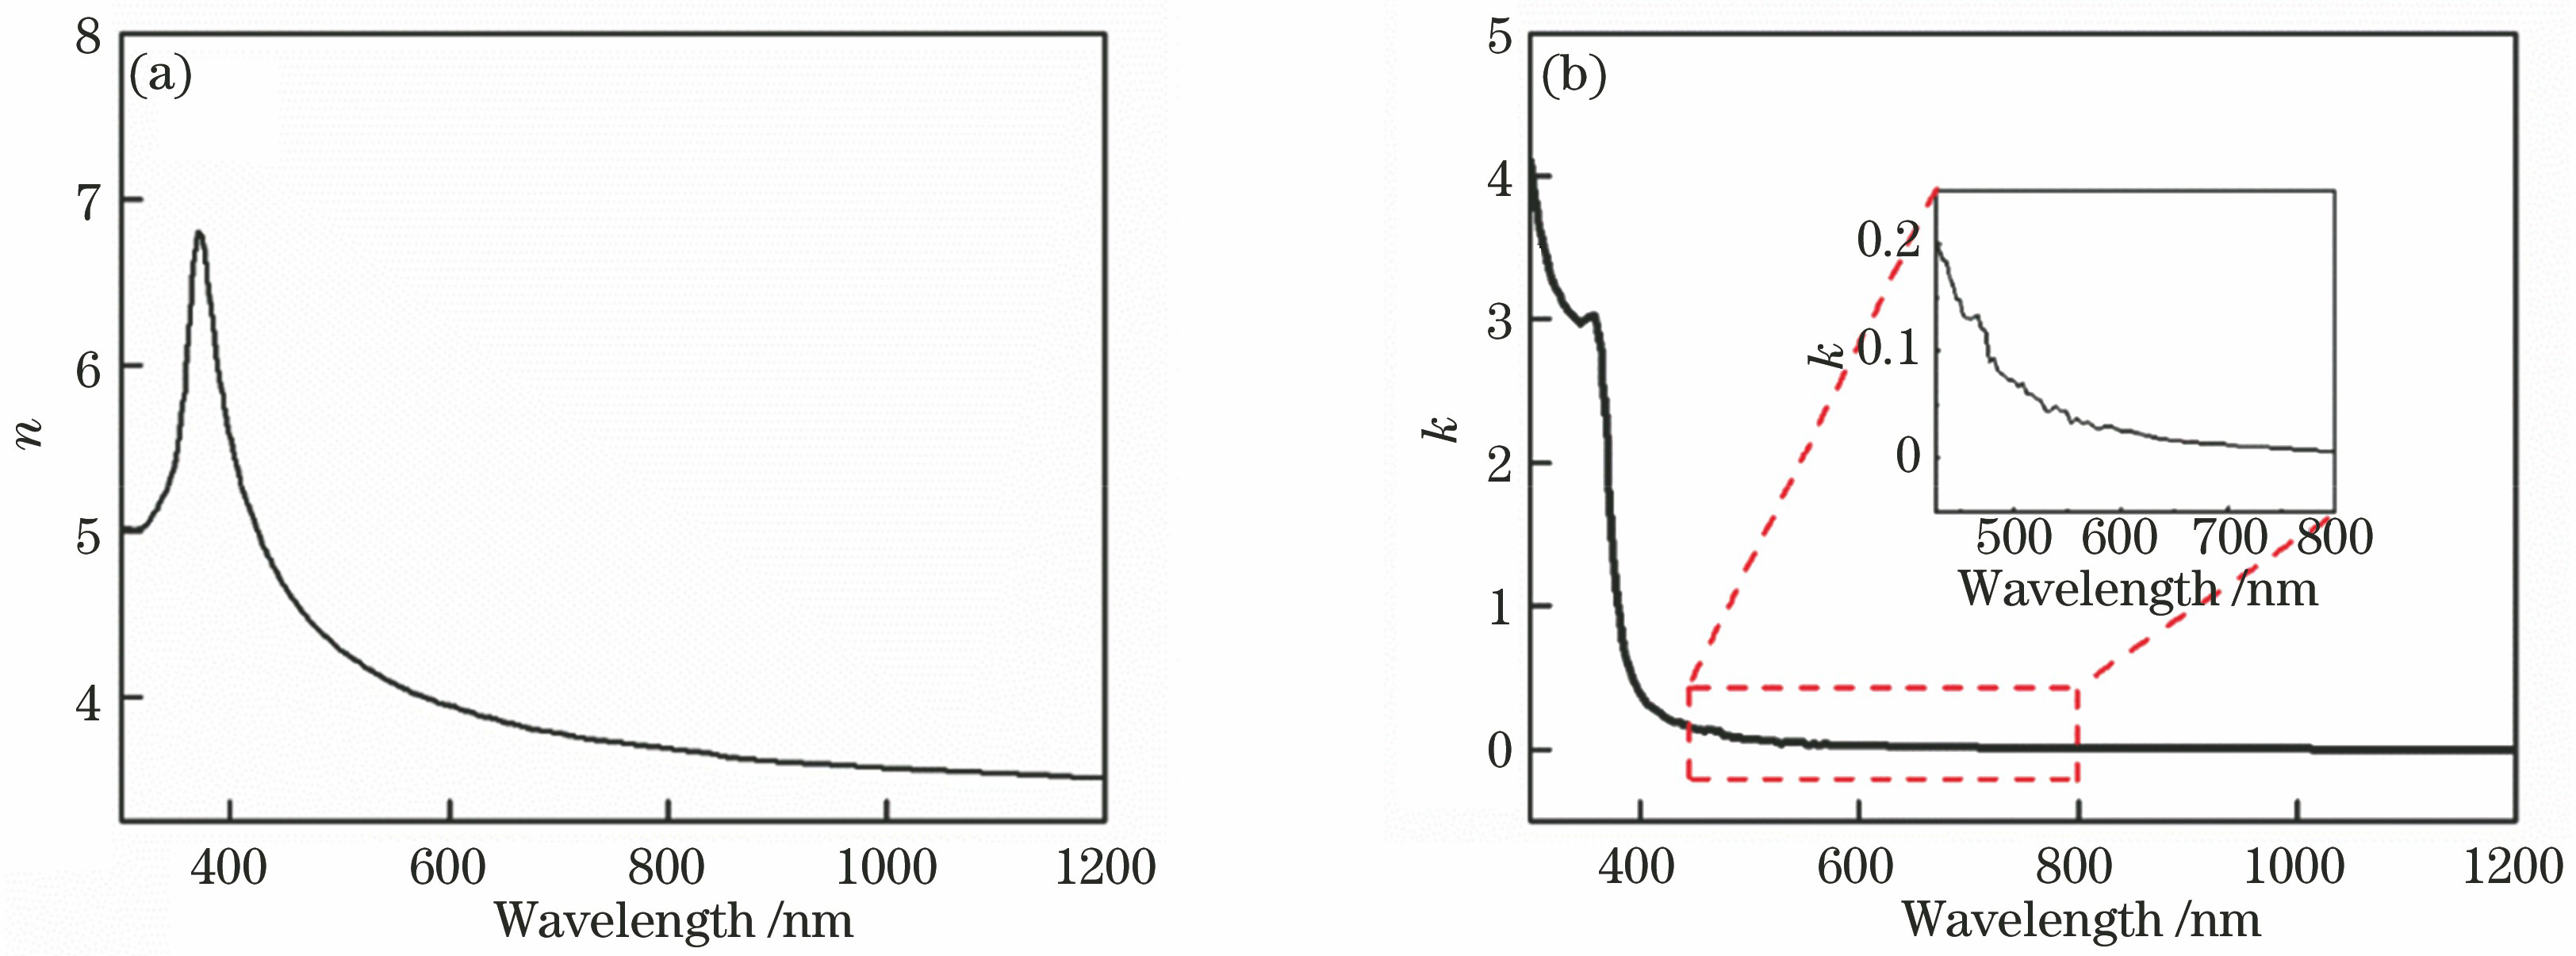 Refractive index n and extinction coefficient k curves of single crystal silicon. (a) Refractive index n curve; (b) extinction coefficient k curve